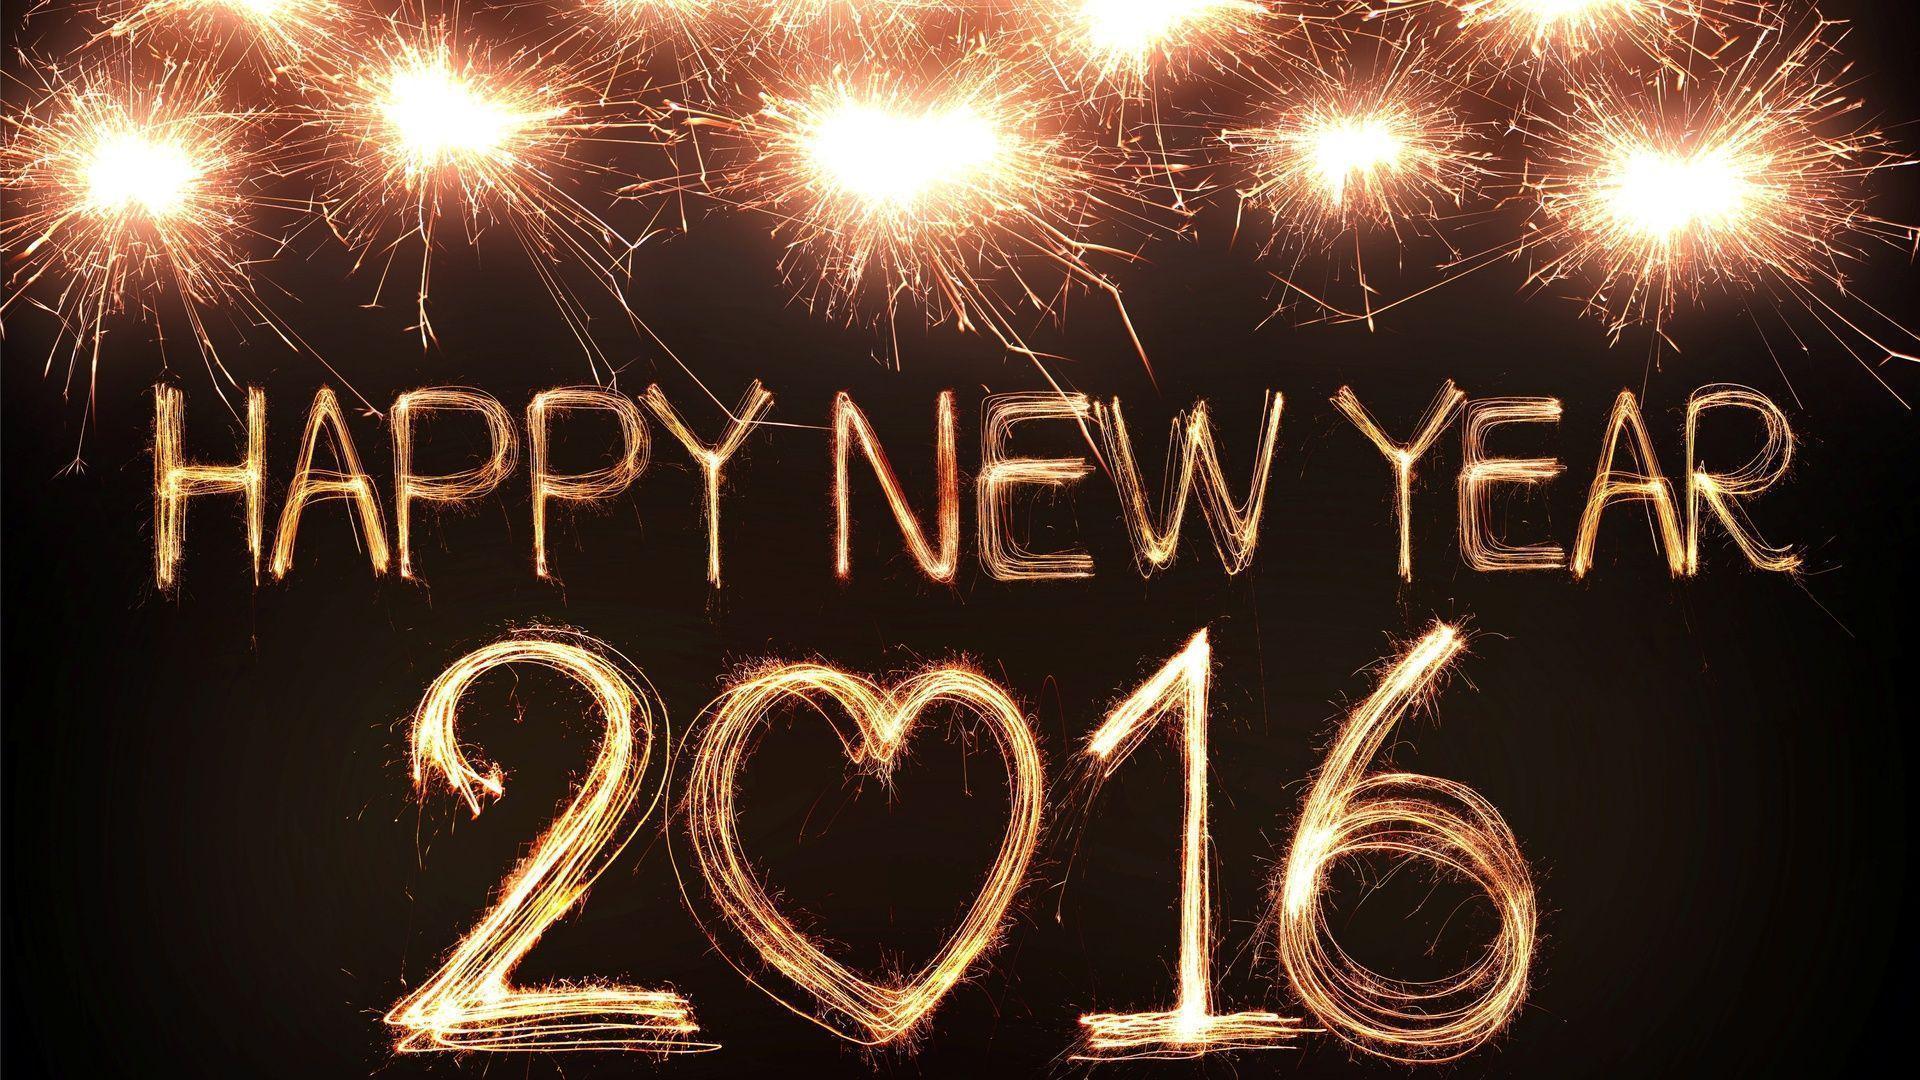 Lovely 2016 Happy New Year Wallpaper.info. Free